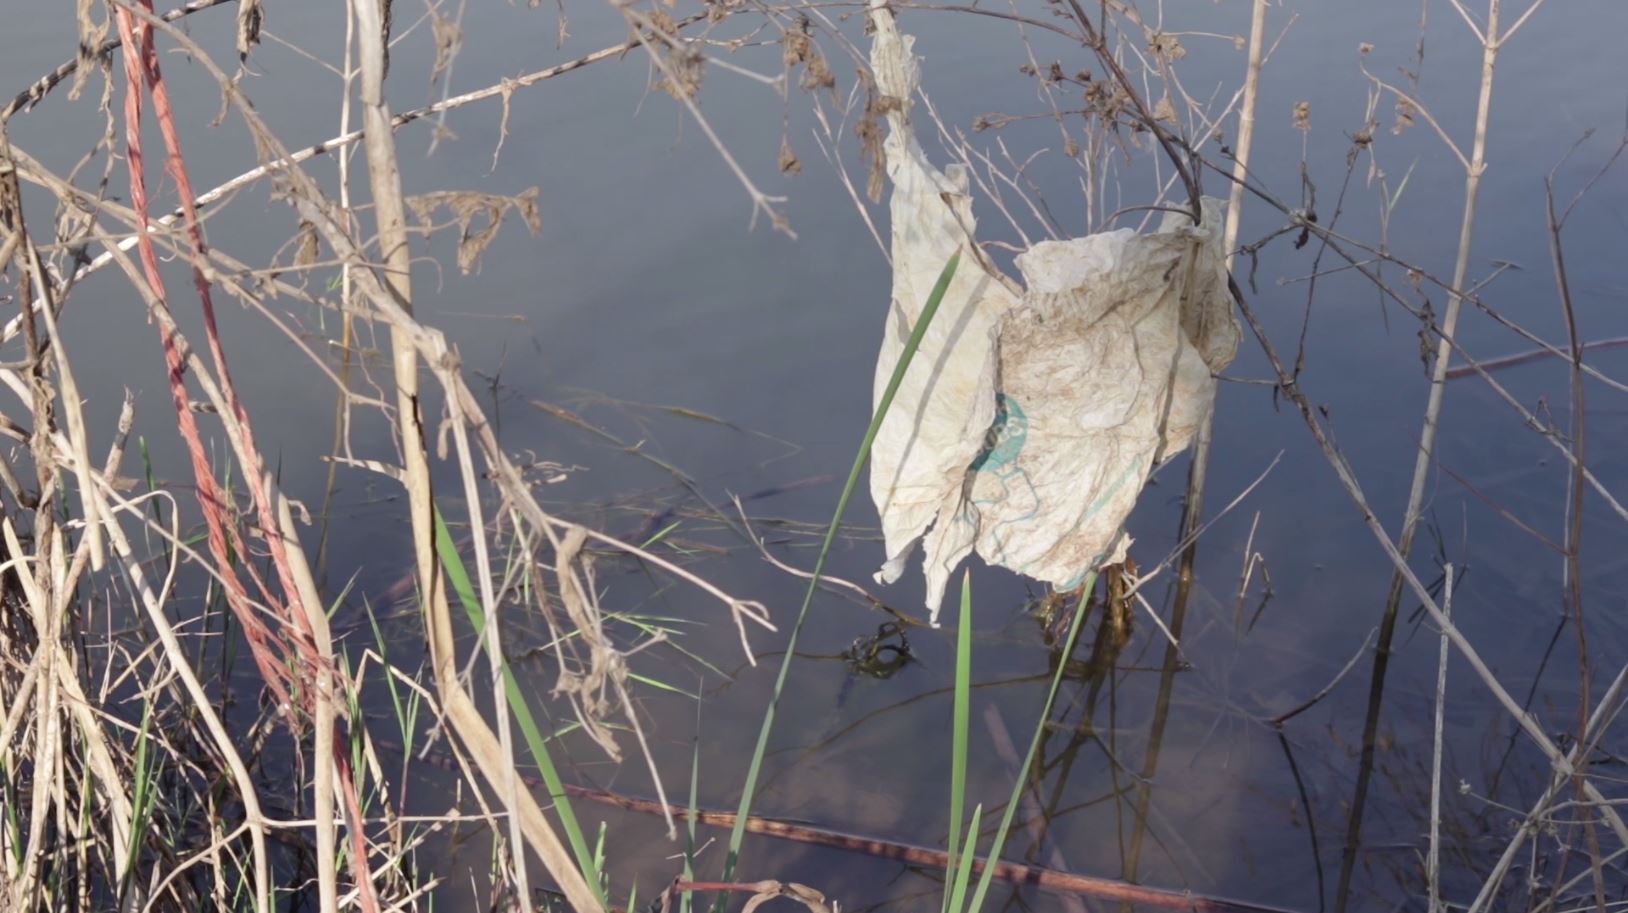 Plastic bag trapped in plants